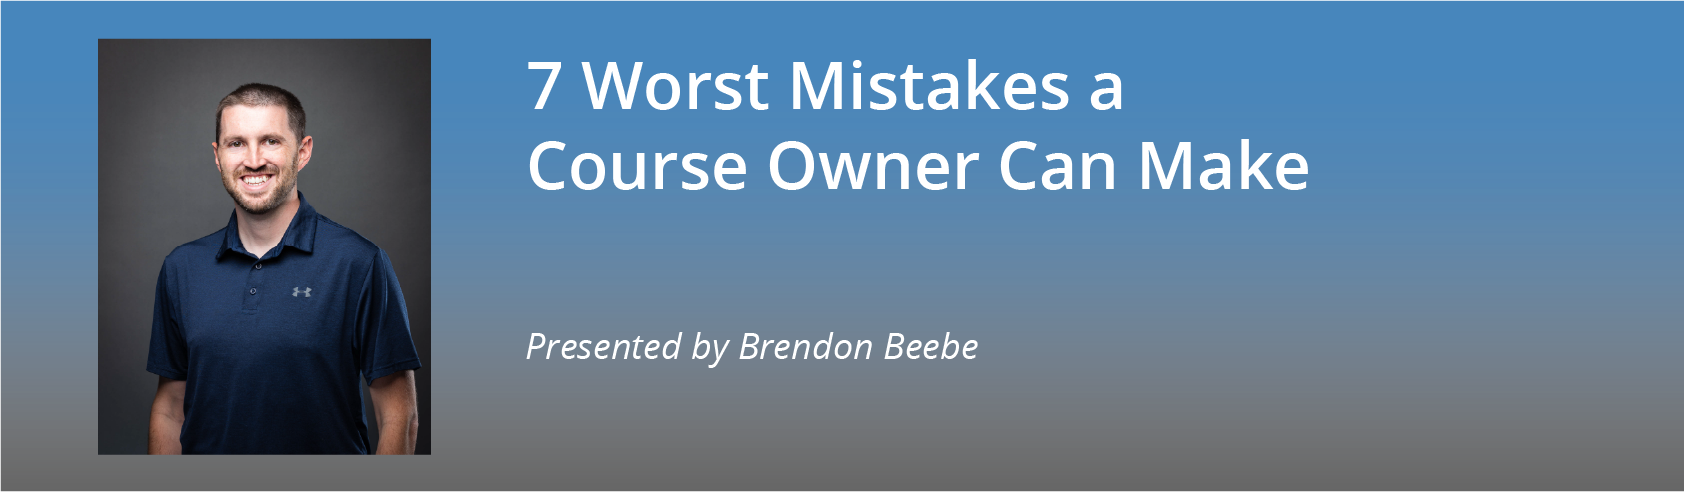 Virtual Summit | 7 Worst Mistakes Course Owners Can Make — Brendon Beebe